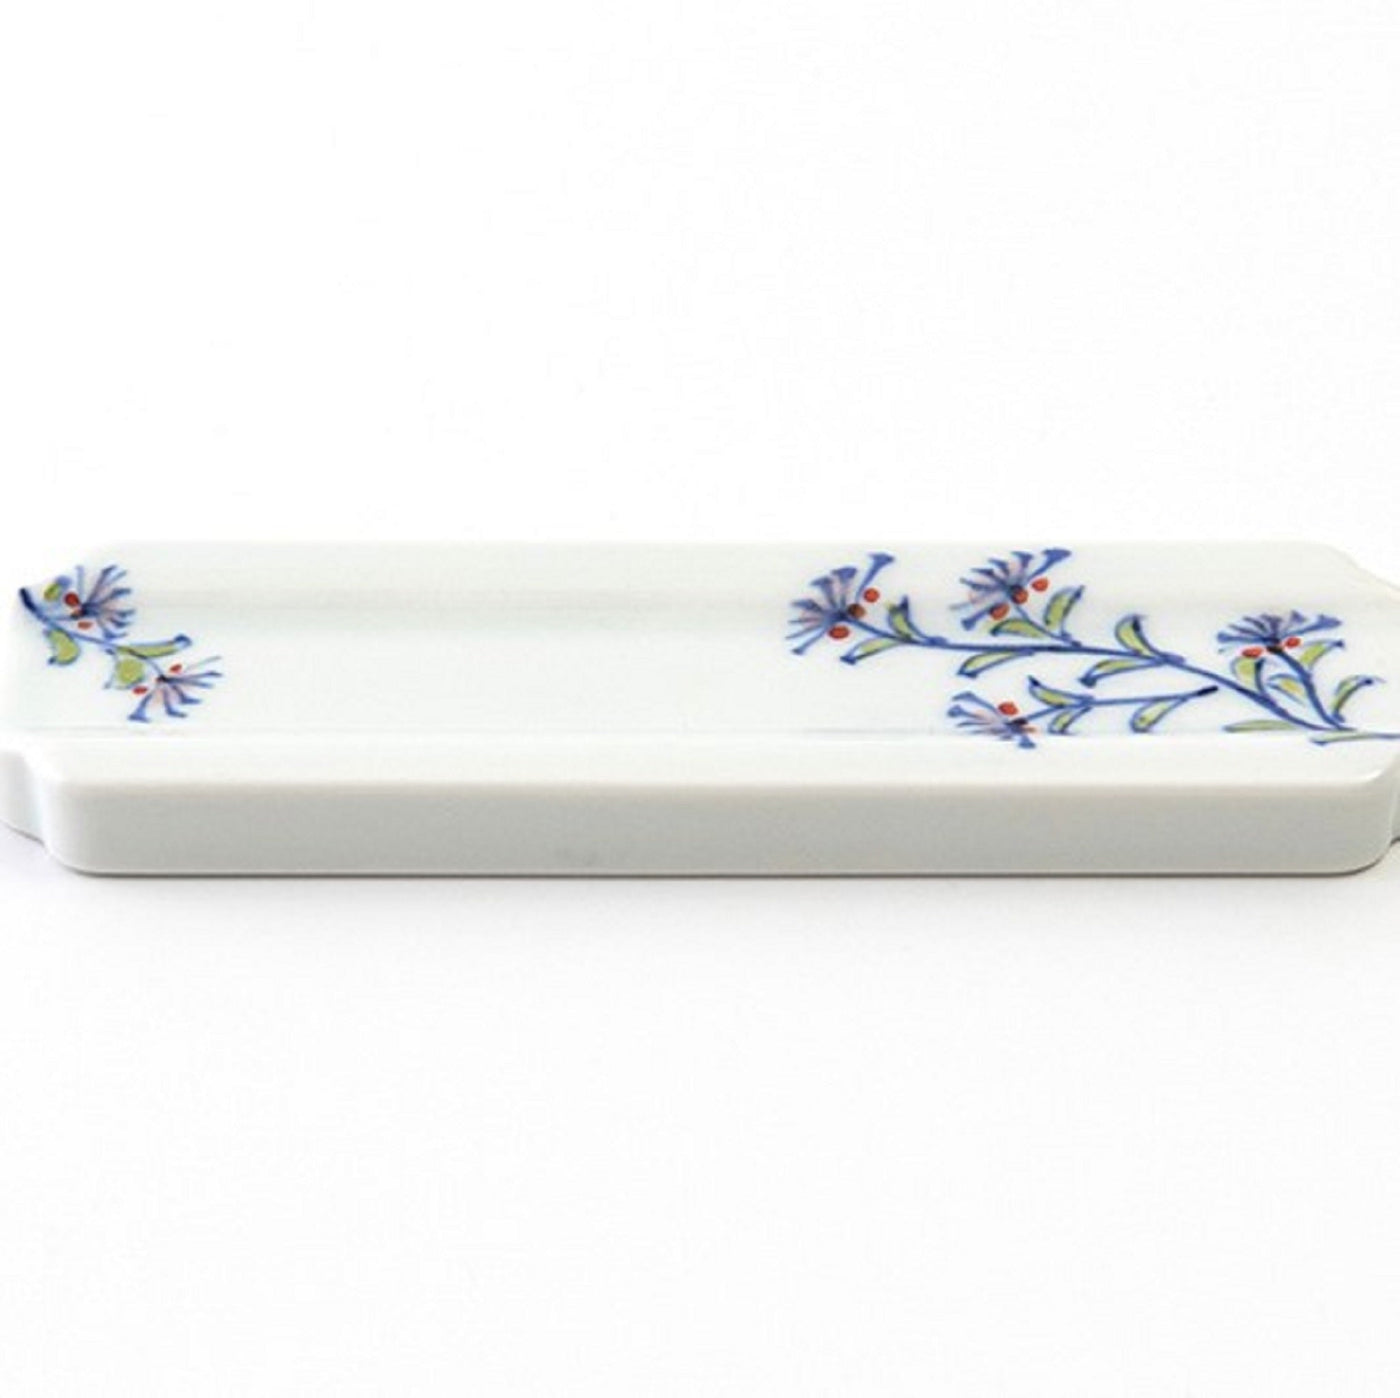 A pair of Cutlery rest: Field flowers